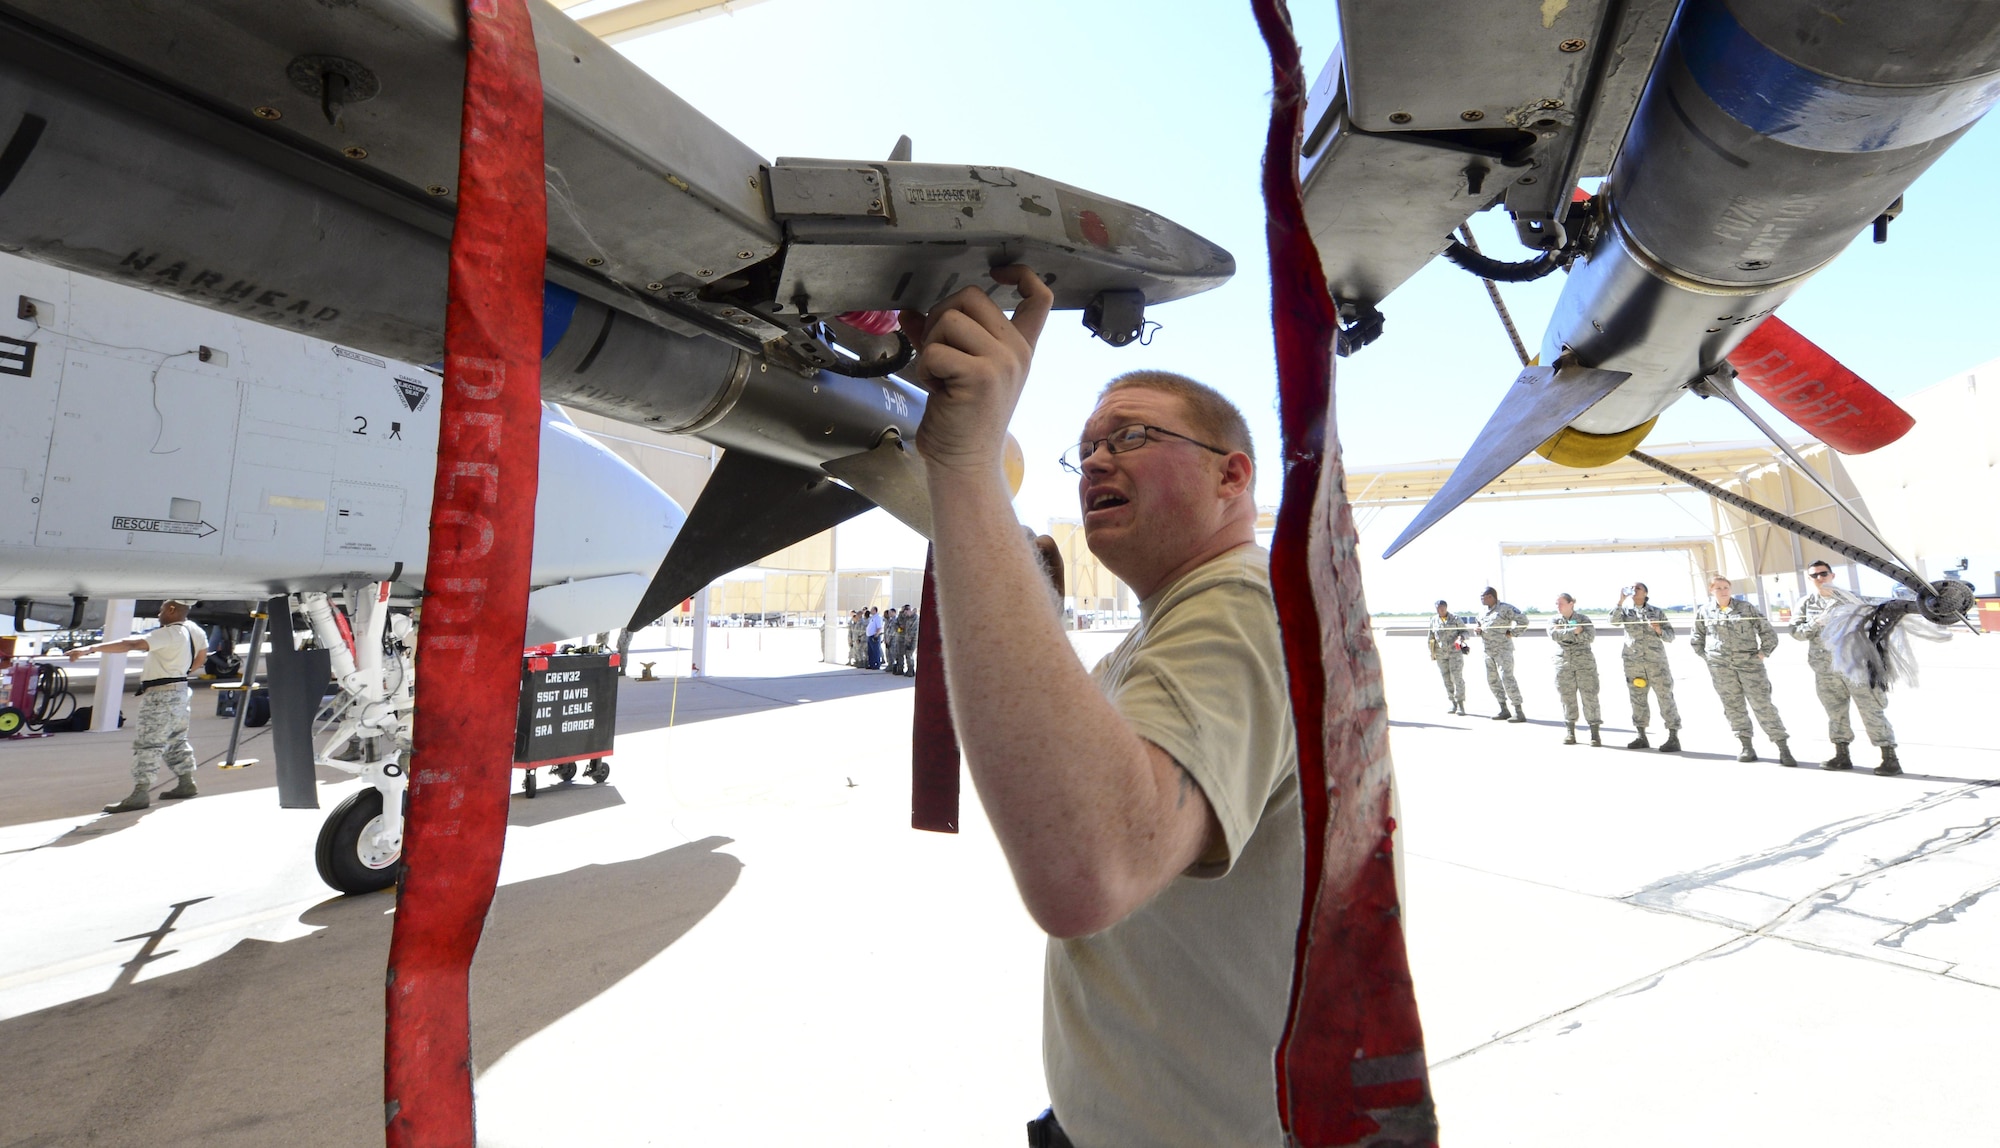 U.S. Air Force Staff Sgt. Casey Frye, 354th Aircraft Maintenance Unit weapons load crew member, inspects a missile rack after an AIM-9 Sidewinder missile was loaded onto an A-10C Thunderbolt II during a load crew of the quarter competition at Davis-Monthan Air Force Base, Ariz., Oct. 7, 2016. The load crews were evaluated based on timeliness and deficiencies during the contest. (U.S. Air Force photo by Airman Nathan H. Barbour)